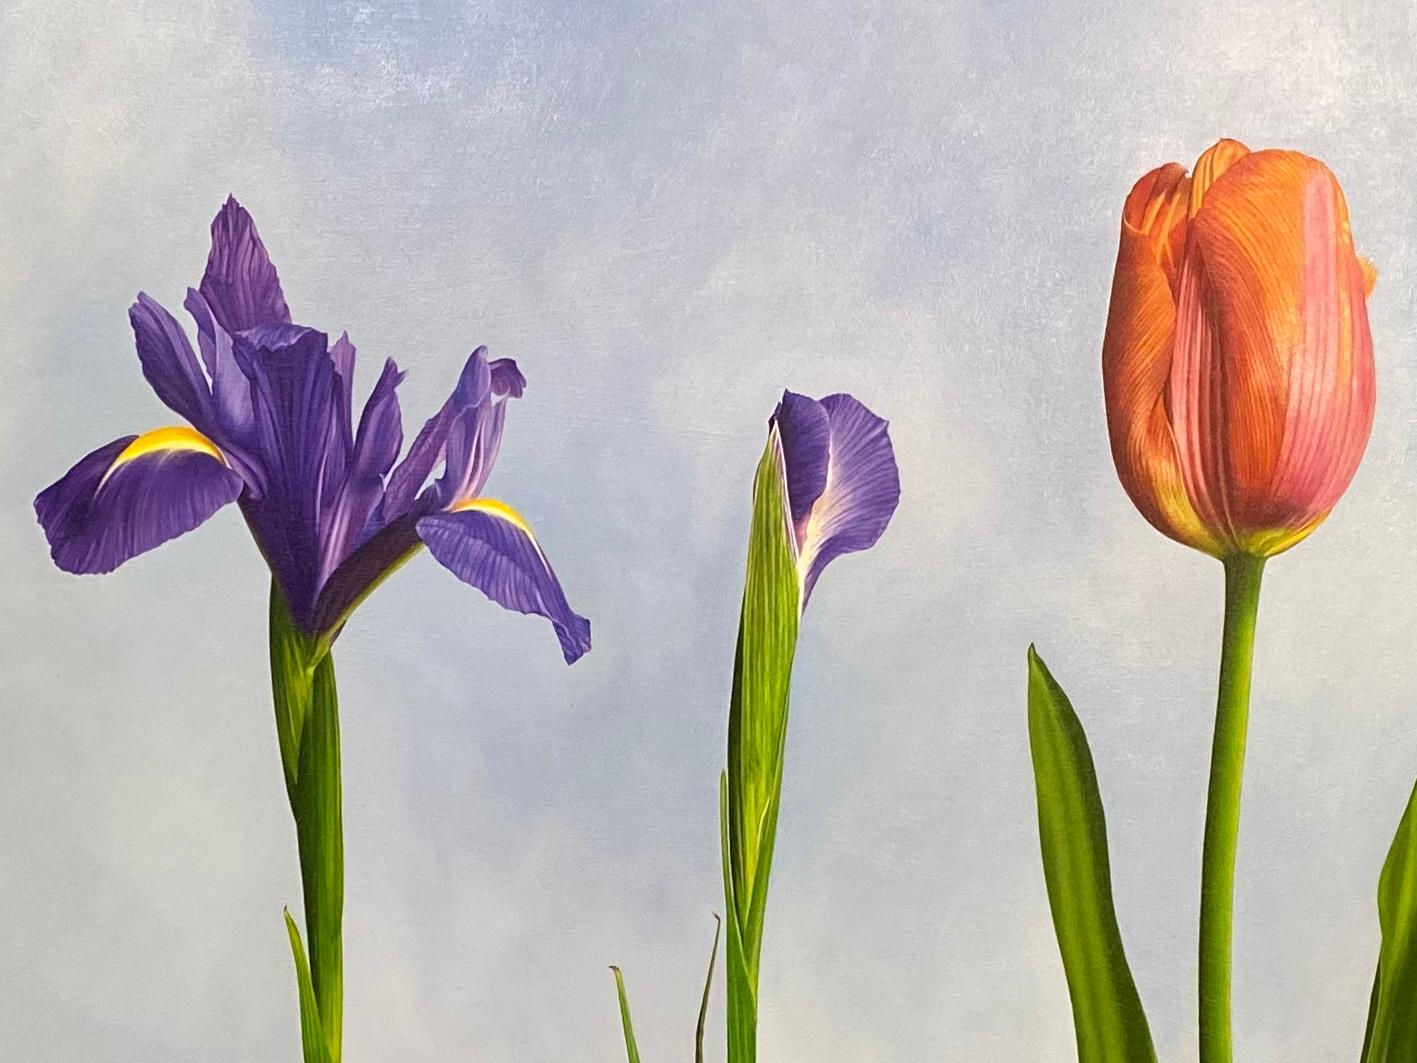 5 Irises and 1 Tulip- 21st Century Oilpainting of flowers in bright colors - Contemporary Painting by JP Marsman